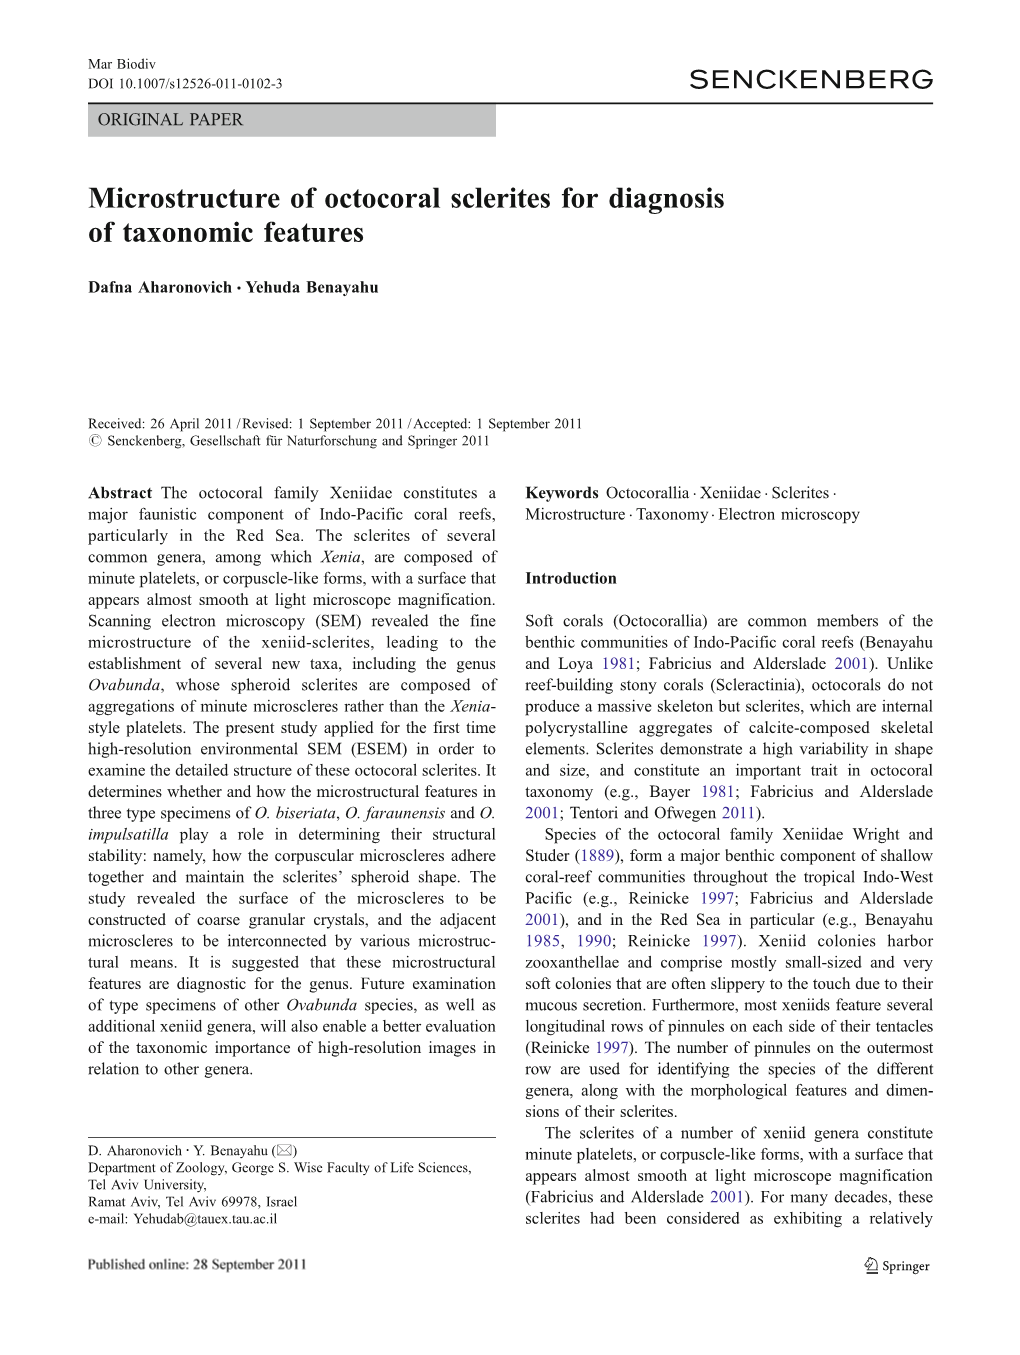 Microstructure of Octocoral Sclerites for Diagnosis of Taxonomic Features